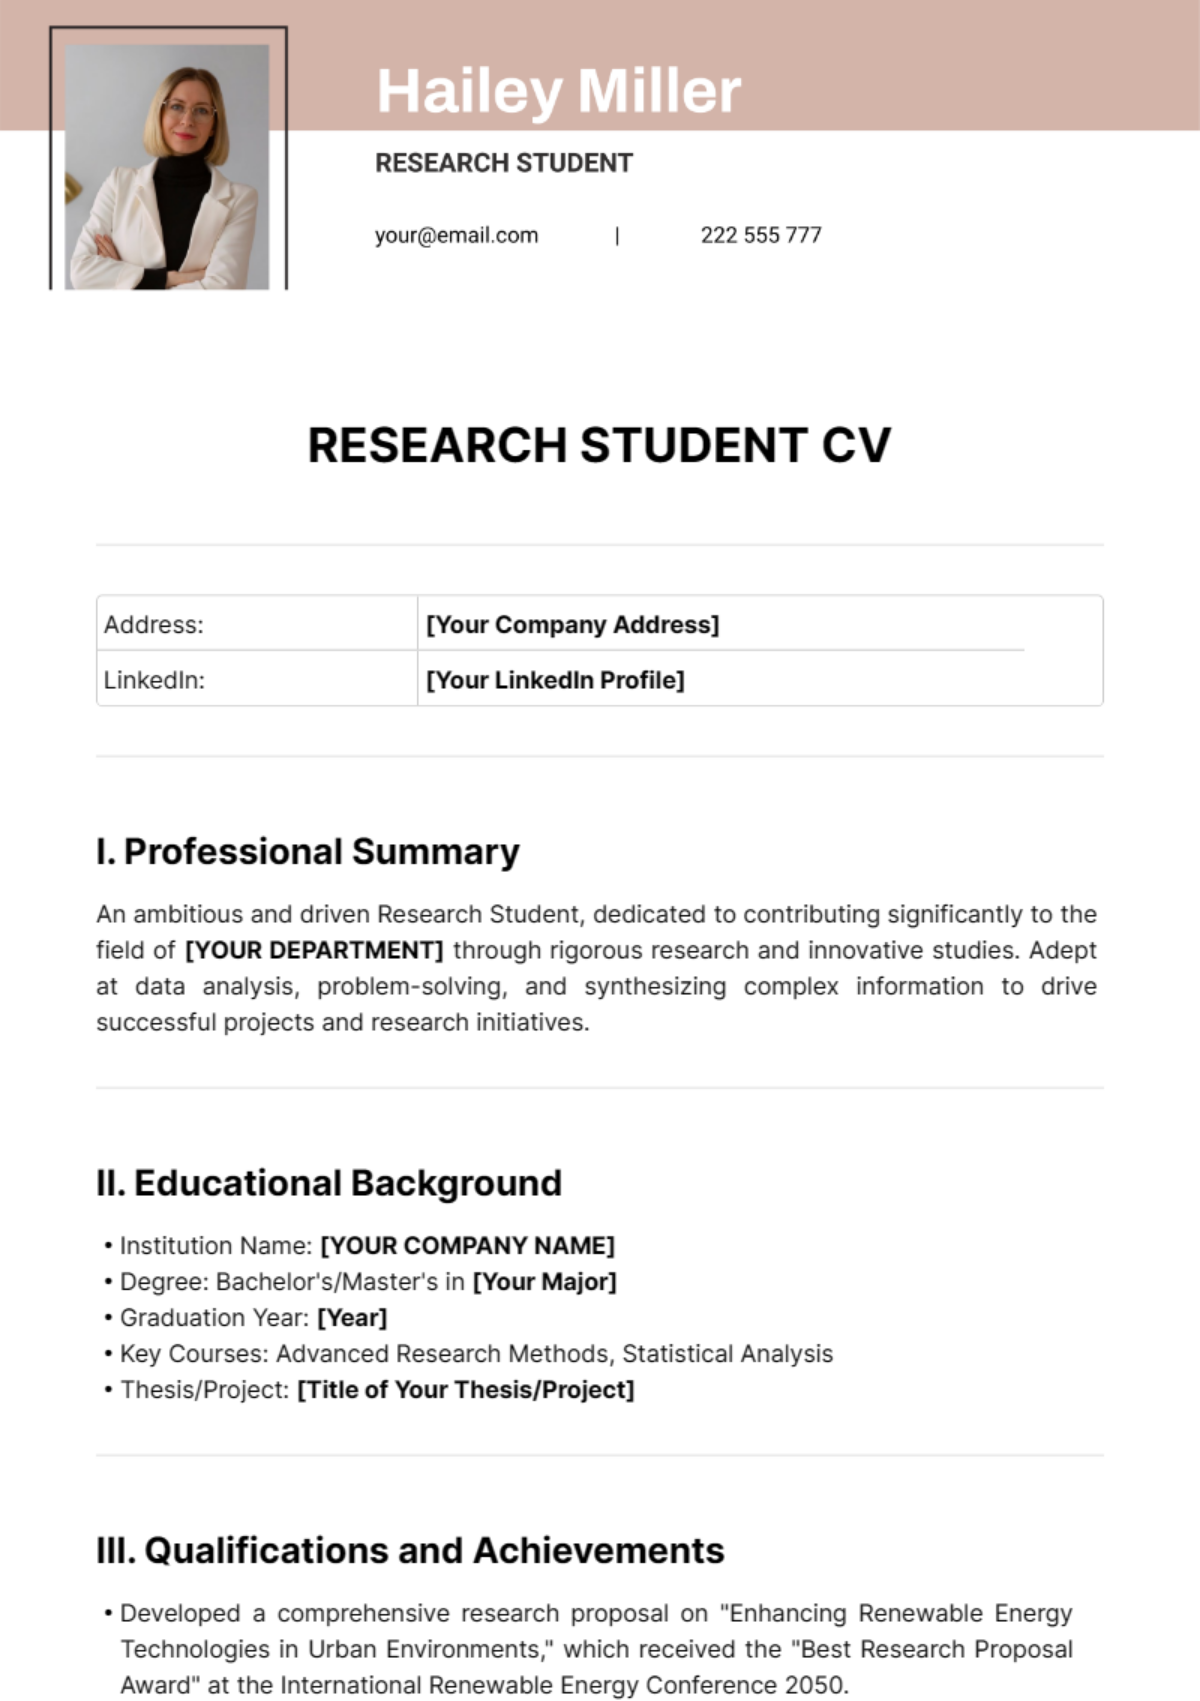 Research Student CV Template